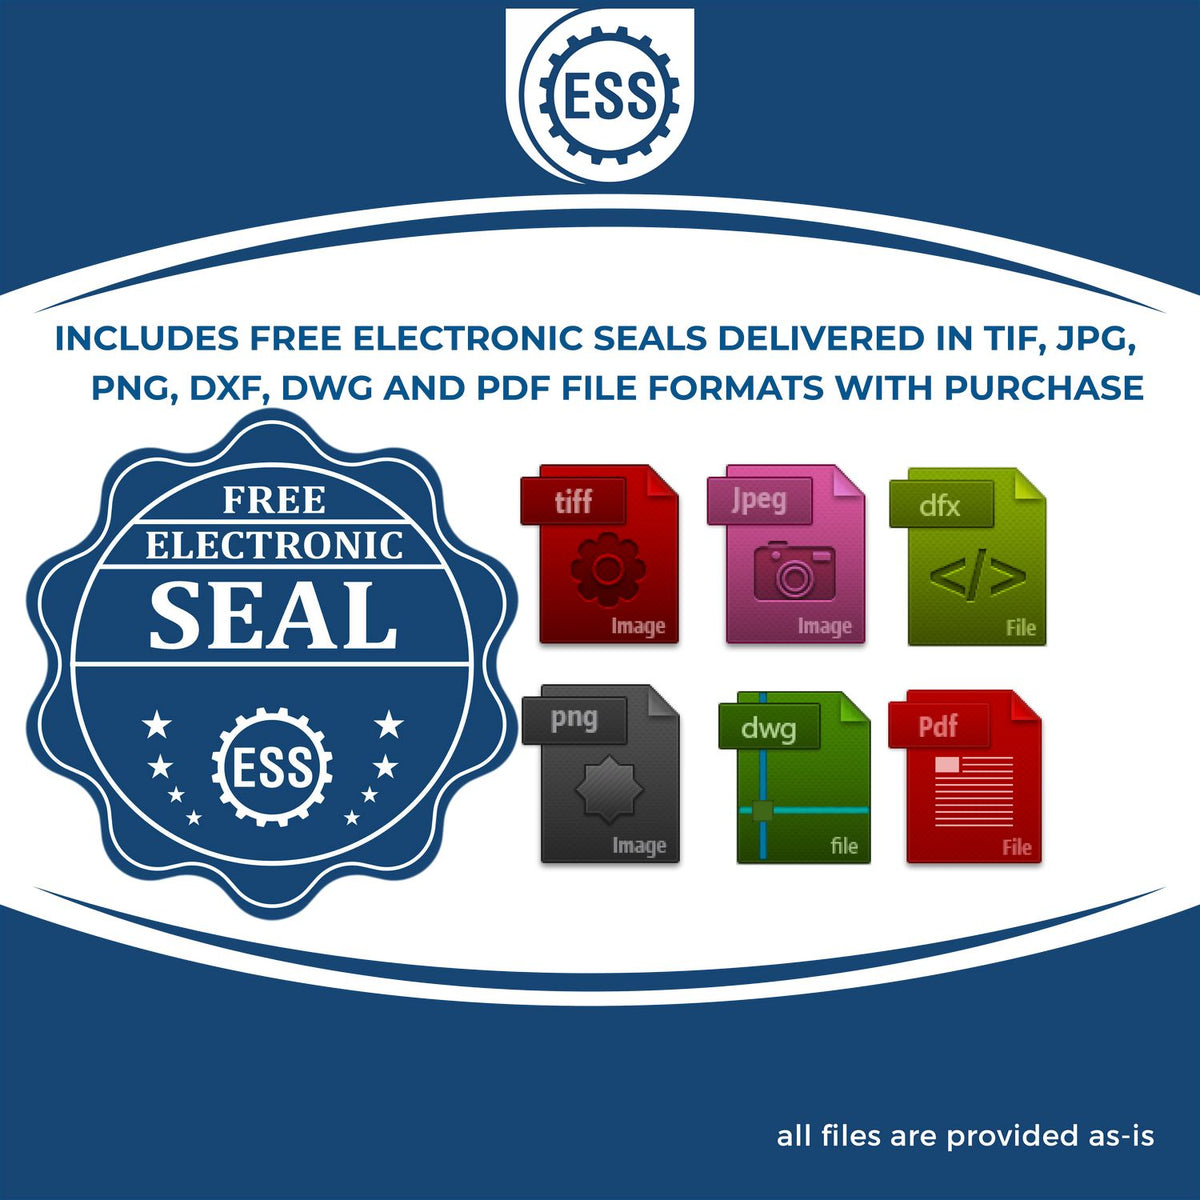 An infographic for the free electronic seal for the Heavy Duty Cast Iron Kansas Geologist Seal Embosser illustrating the different file type icons such as DXF, DWG, TIF, JPG and PNG.